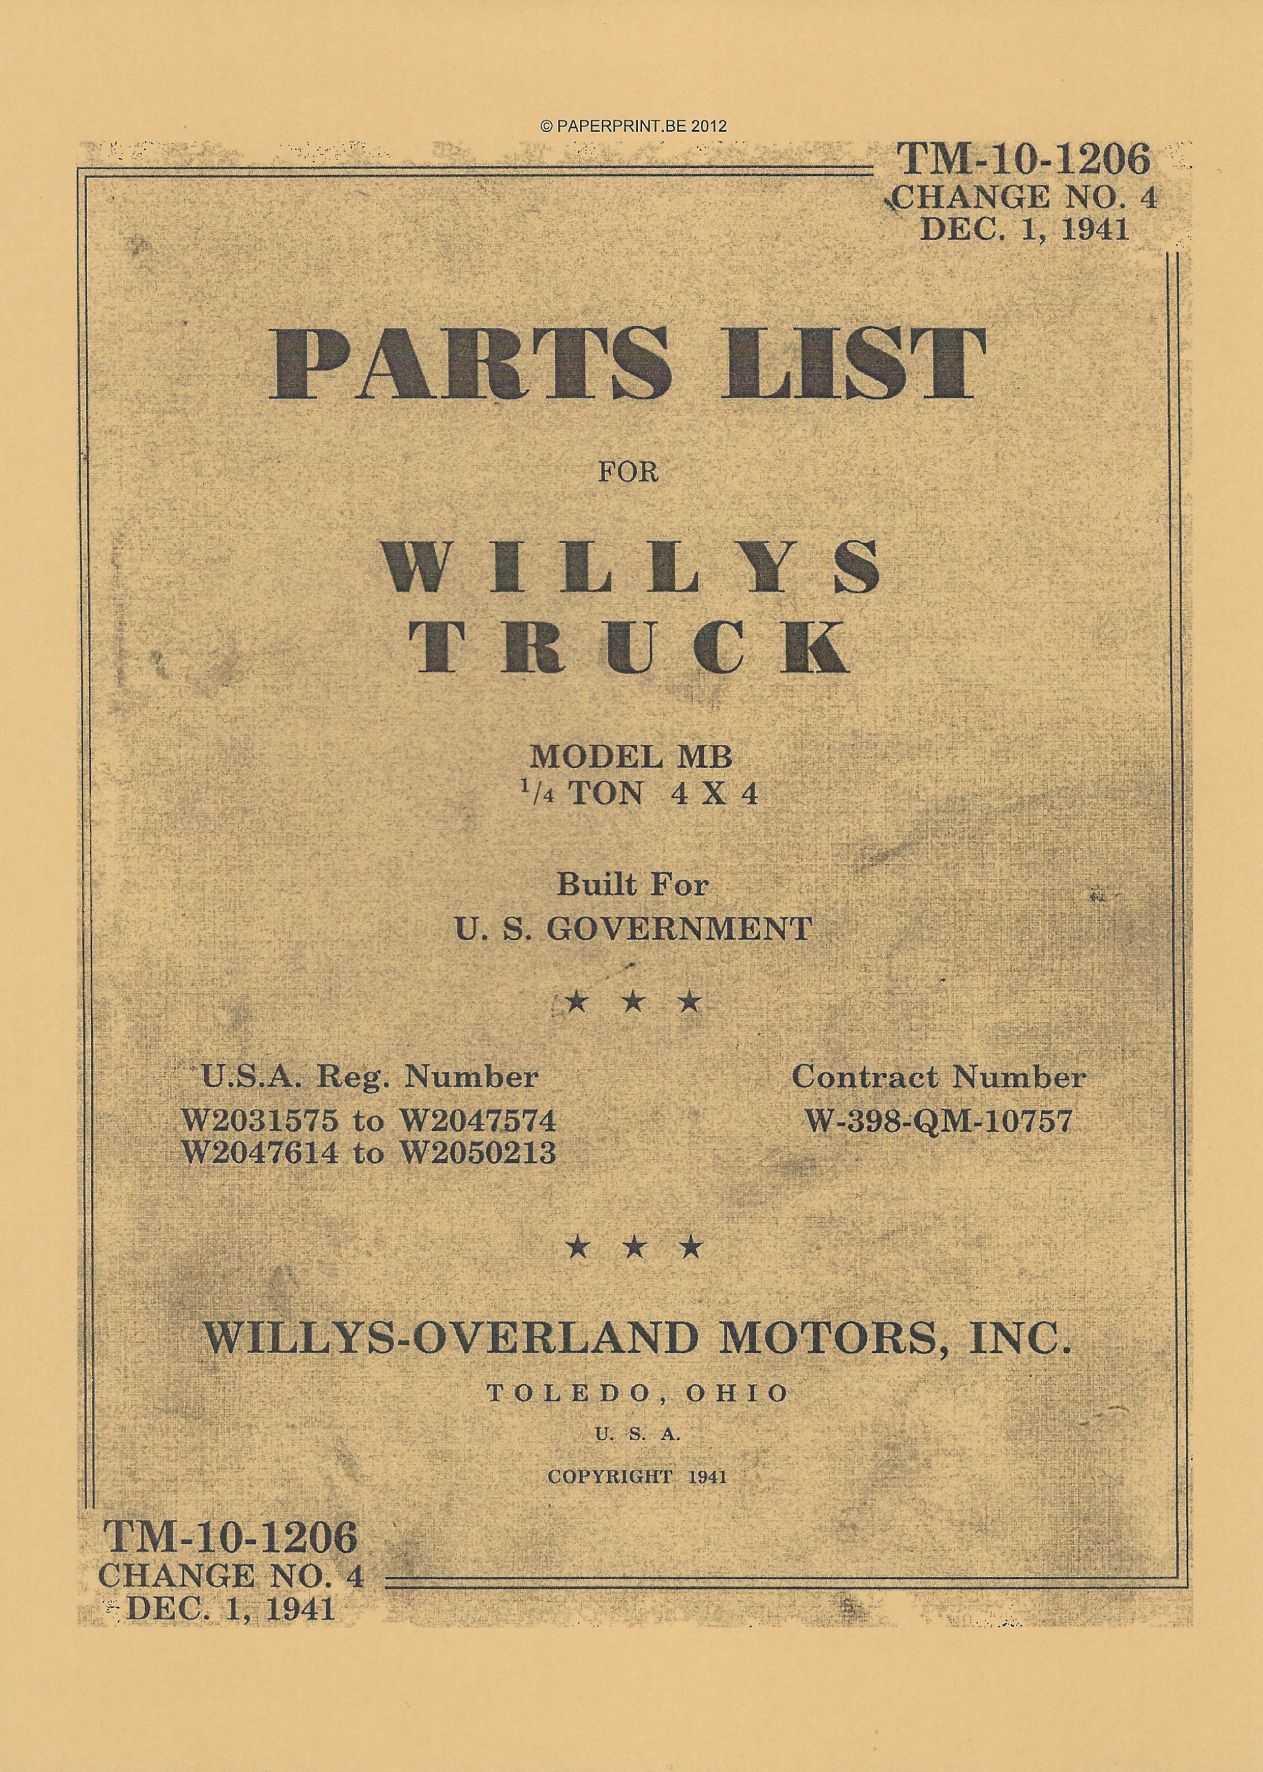 TM 10-1206 US PARTS LIST FOR WILLYS MB